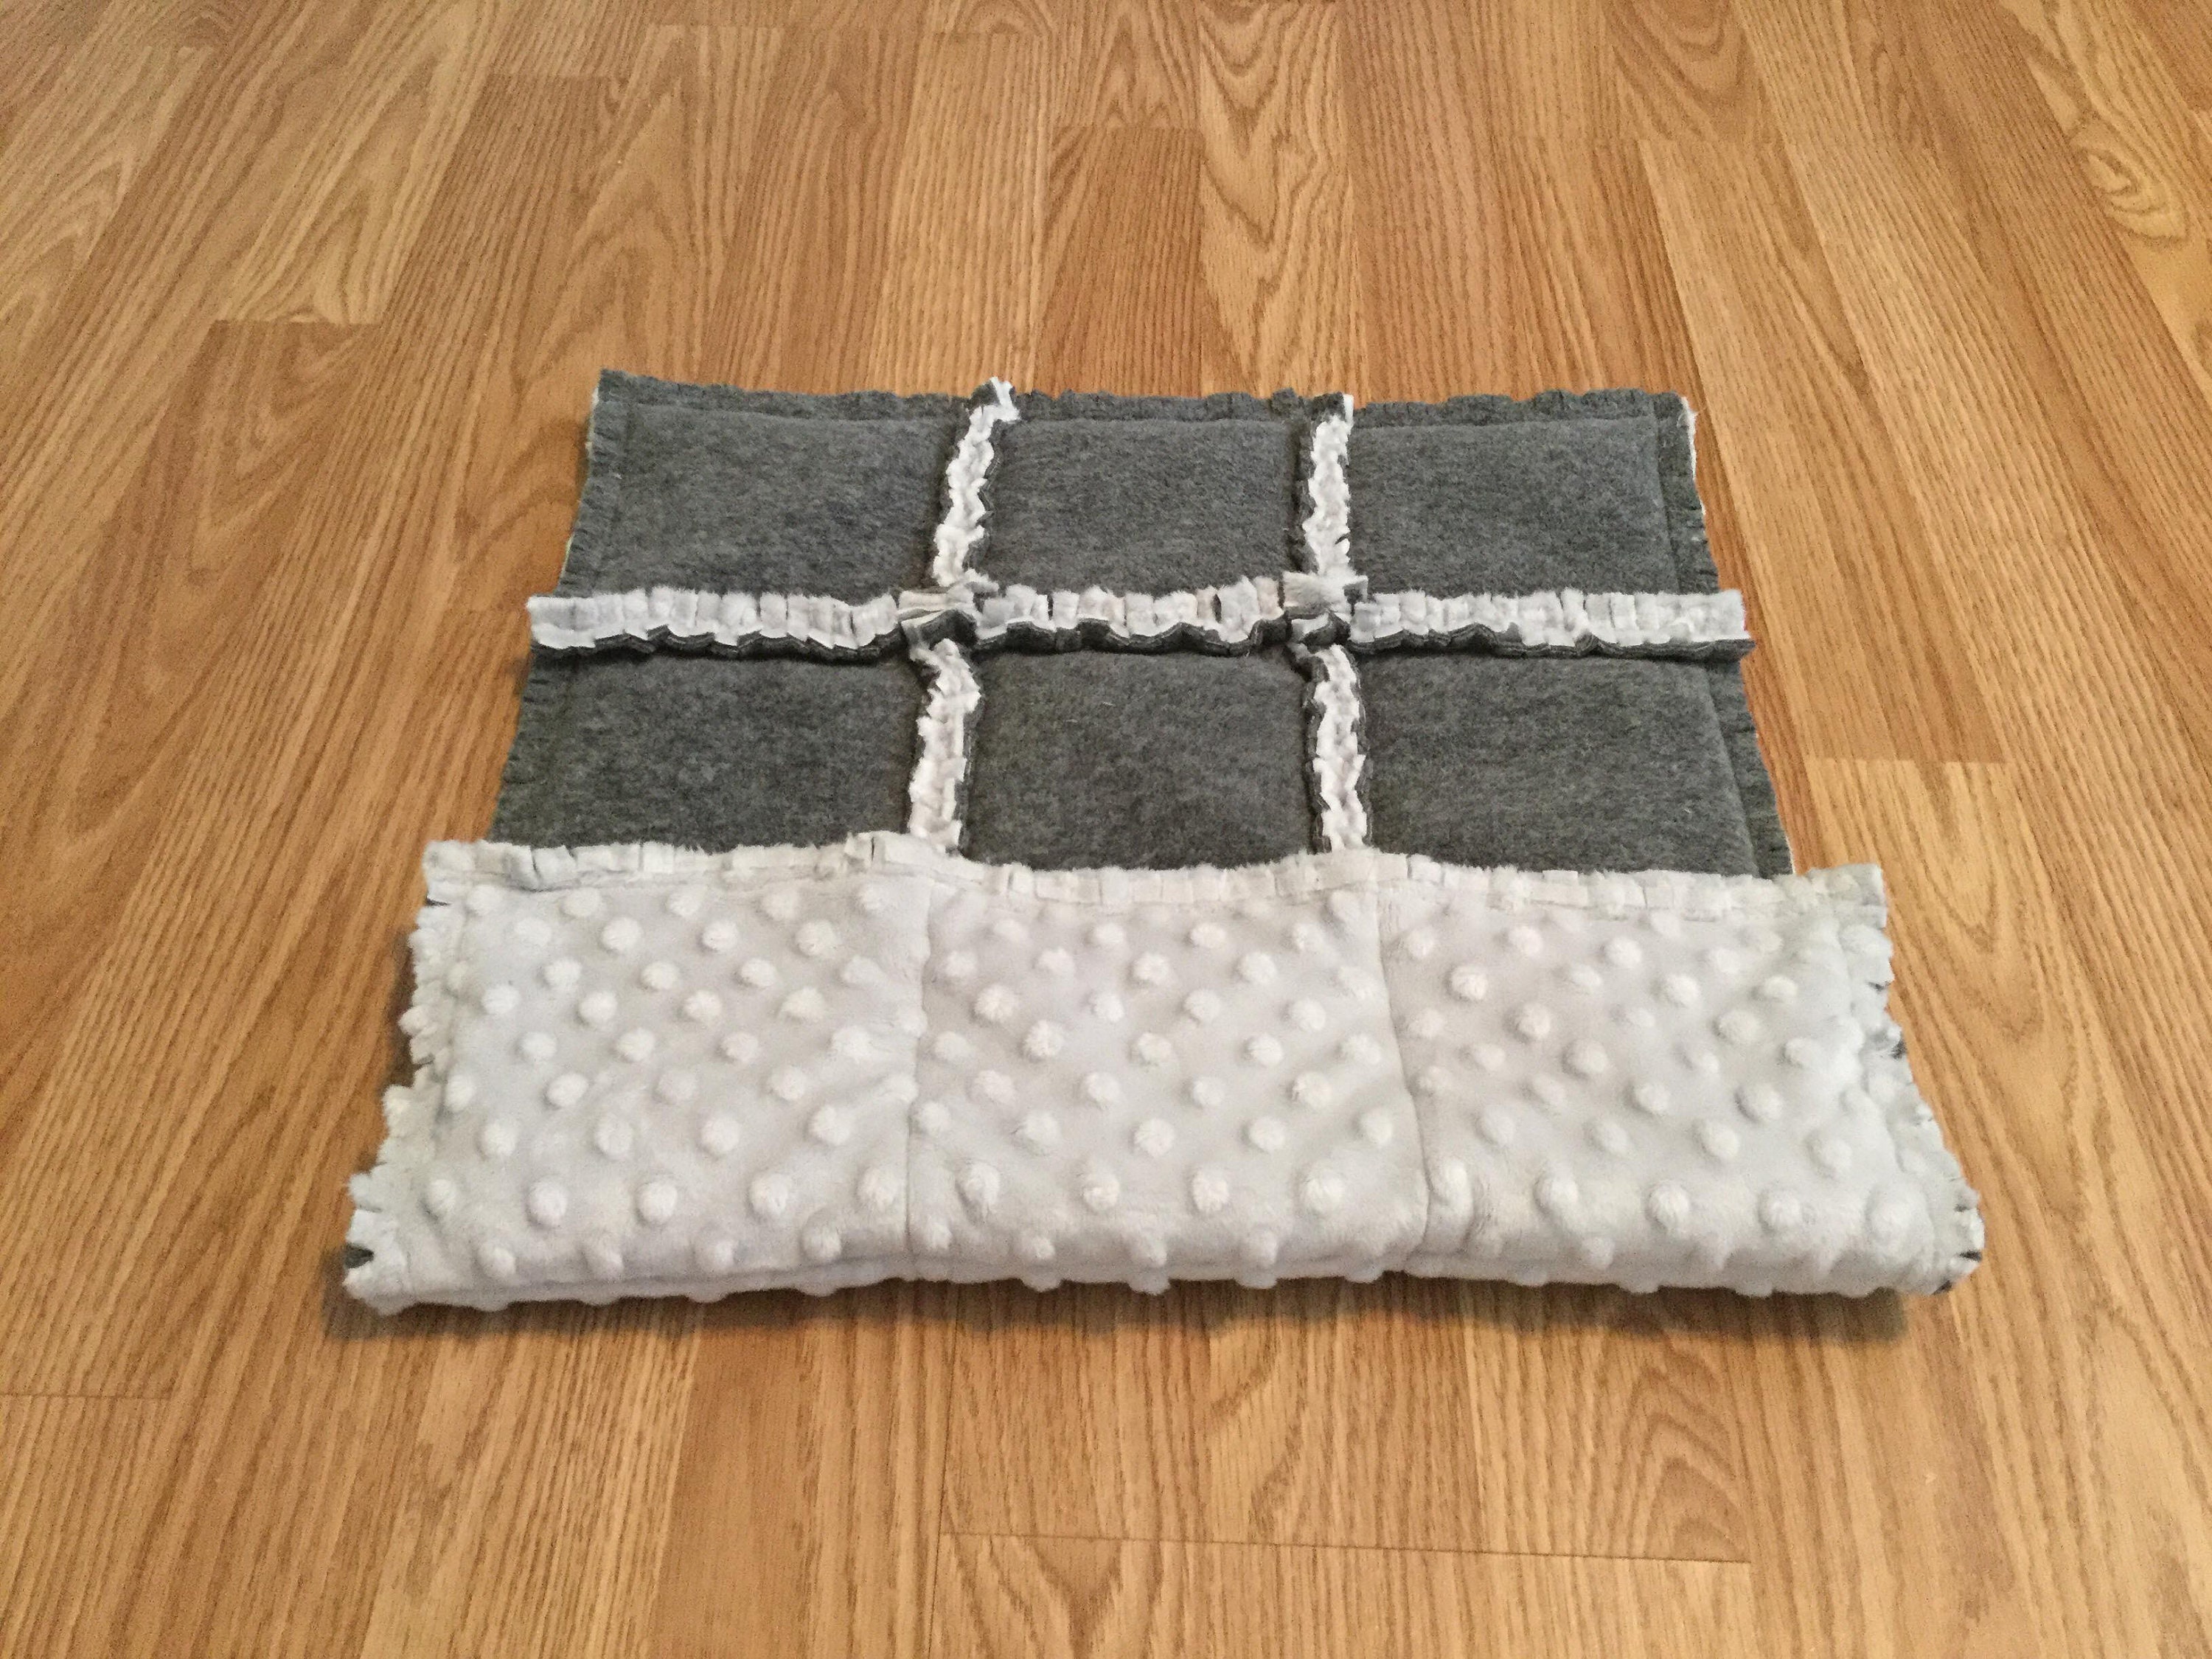 Ready To Ship, Rag Quilt Style Plush 4 lb Weighted Lap Pad, Weighted